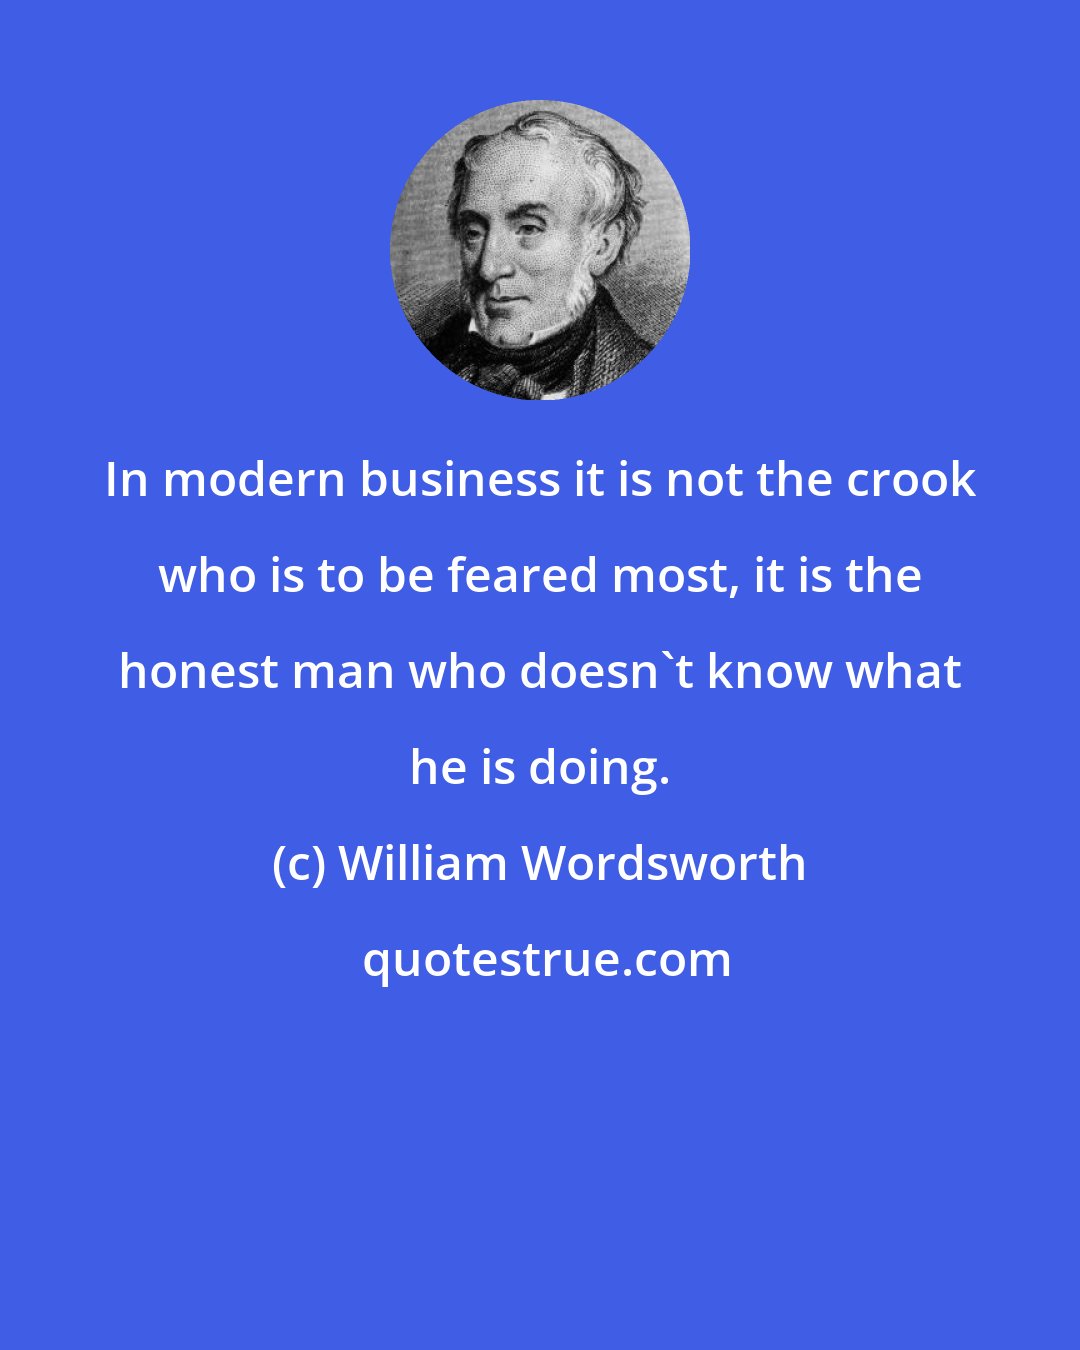 William Wordsworth: In modern business it is not the crook who is to be feared most, it is the honest man who doesn't know what he is doing.